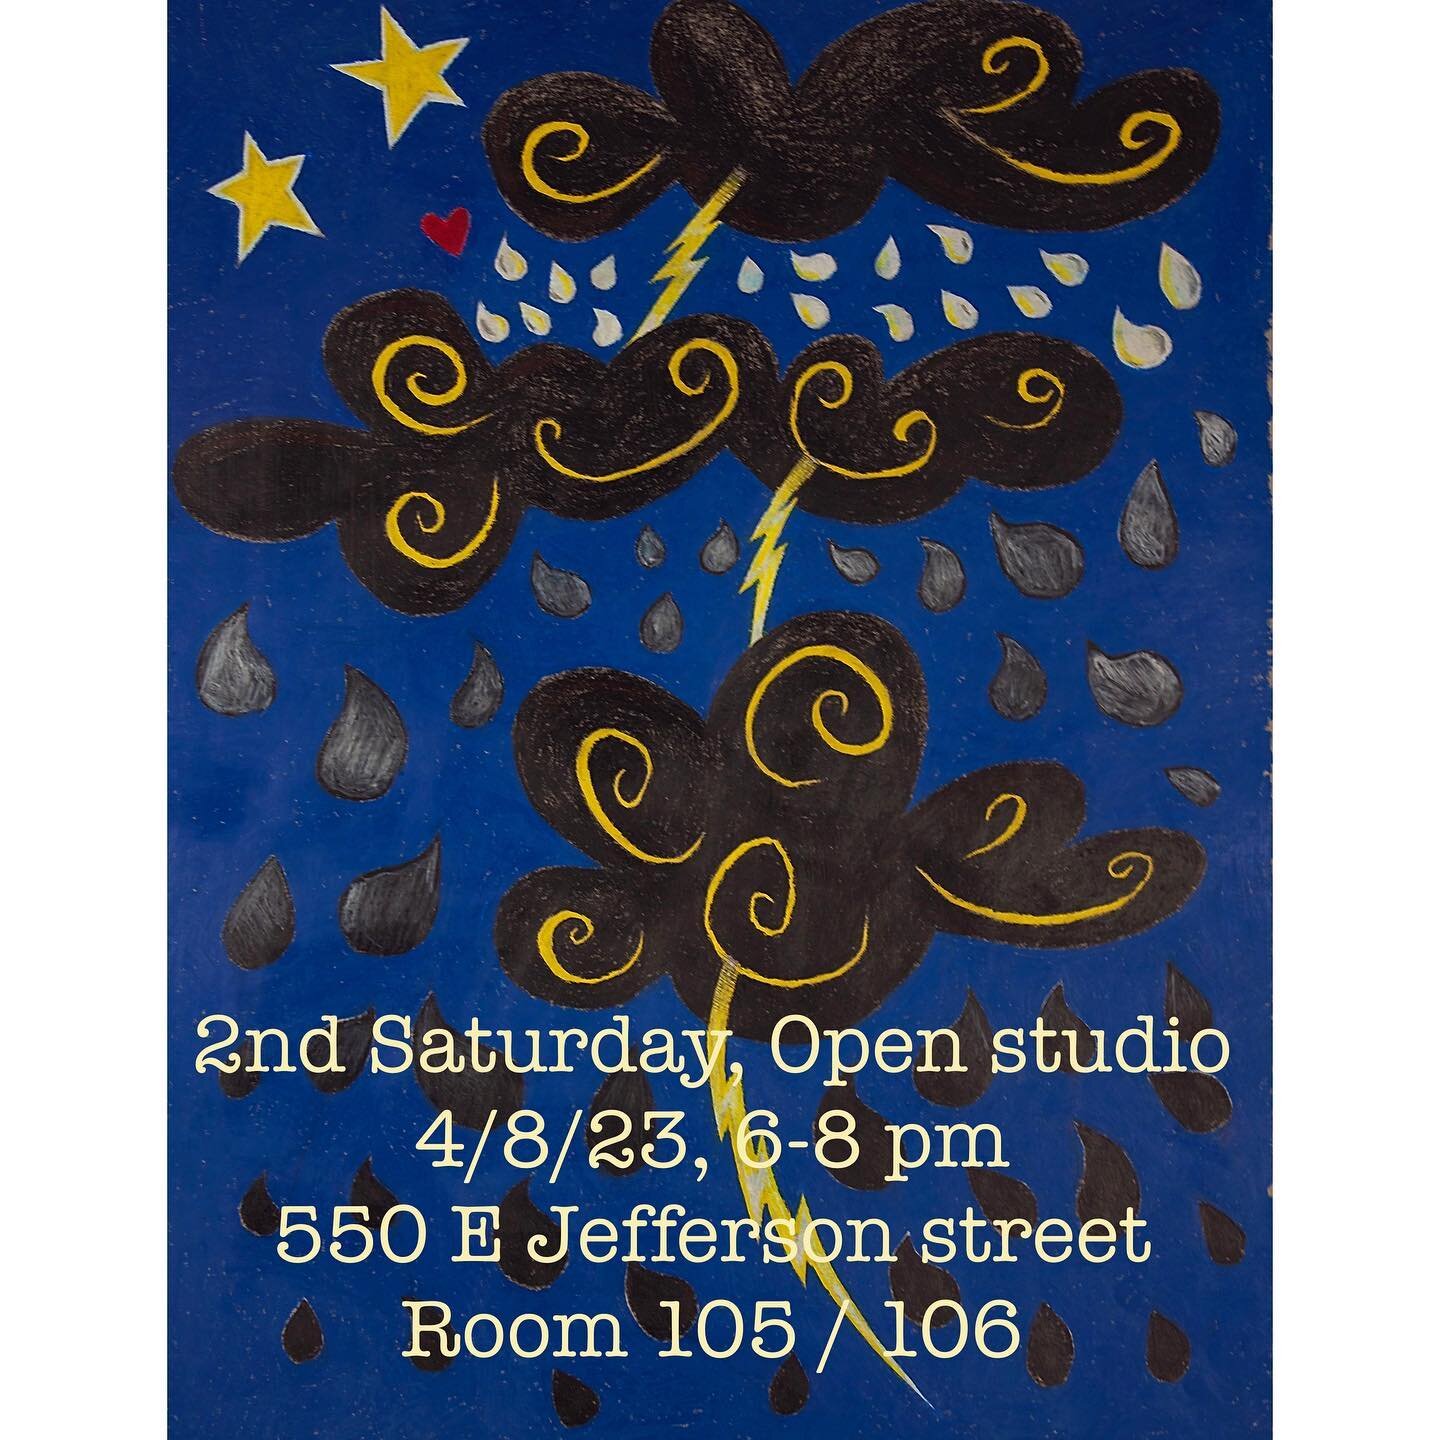 Open studio, tomorrow evening, 4/8/23 from 6-8 pm, bring your ibuprofen, it&rsquo;s gonna be a good time!
.
#art #artist #artwork #artistsoninstagram #draw #drawing #drawings #paint #painter #painting #paintings #🖤